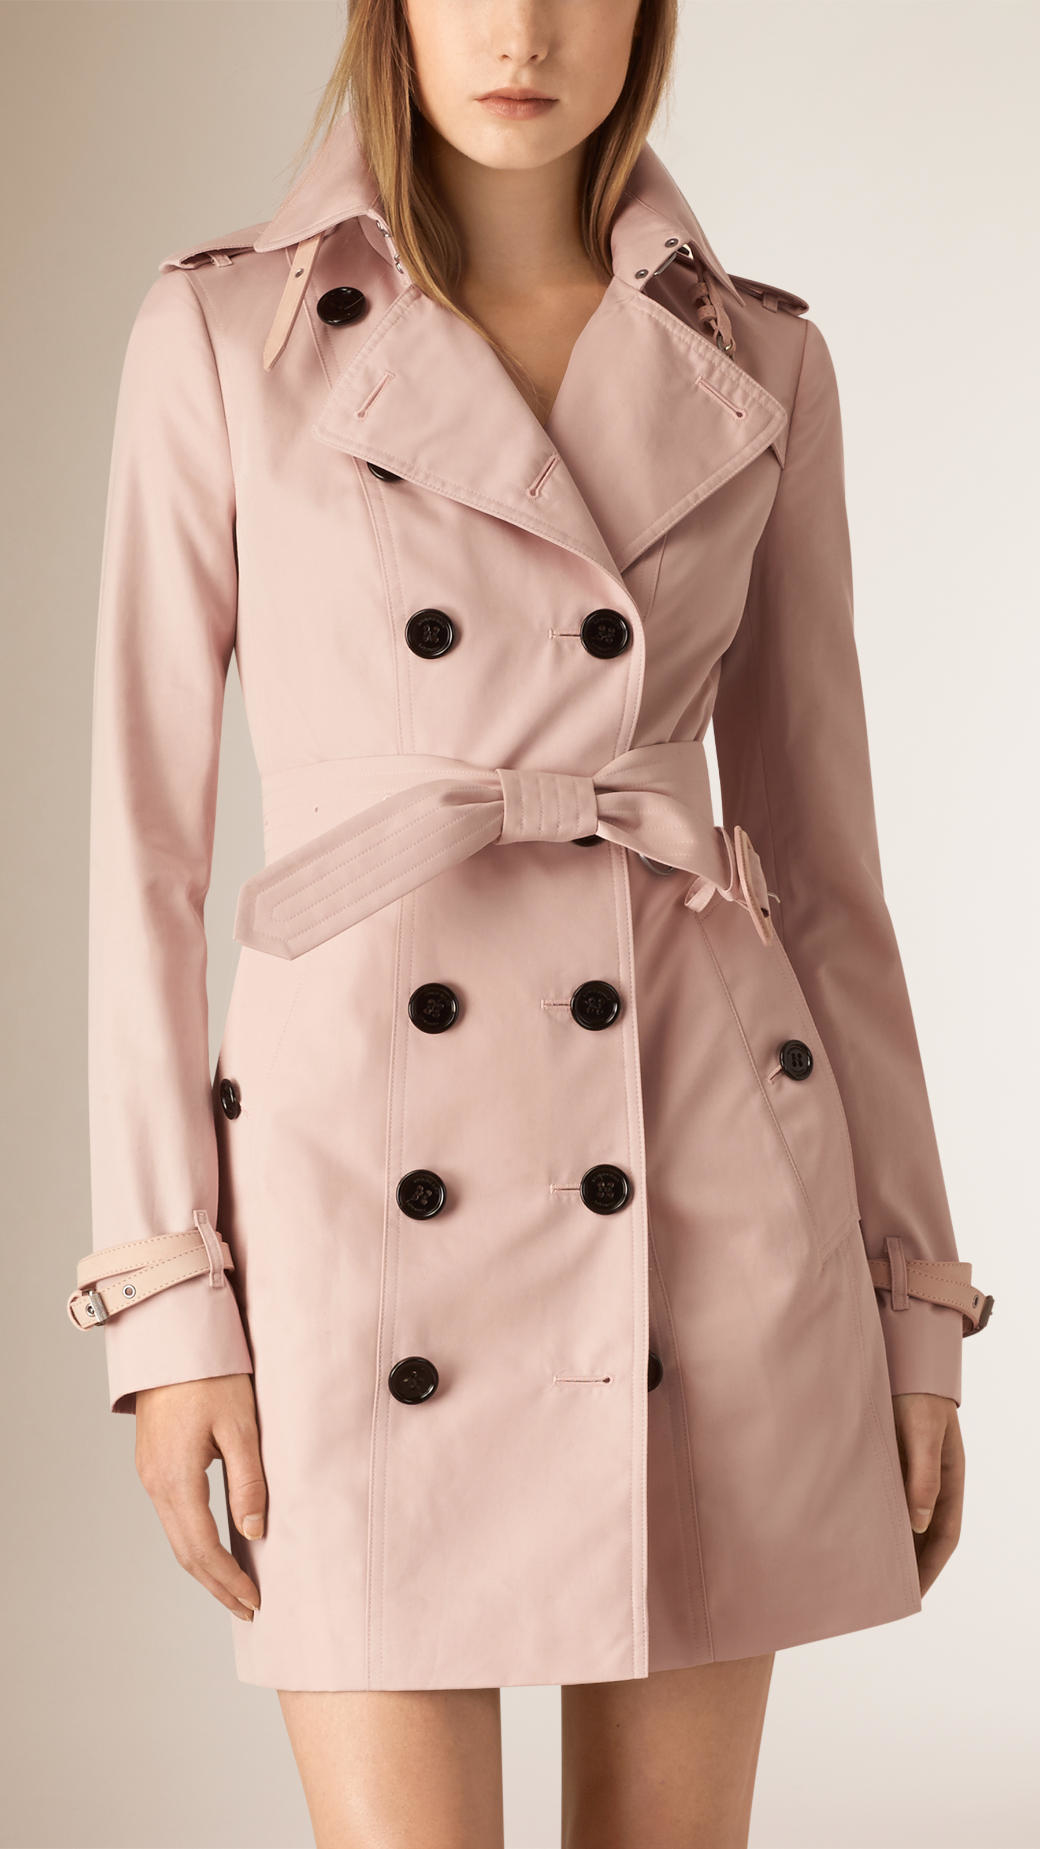 Lyst - Burberry Leather Trim Cotton Gabardine Trench Coat in Pink